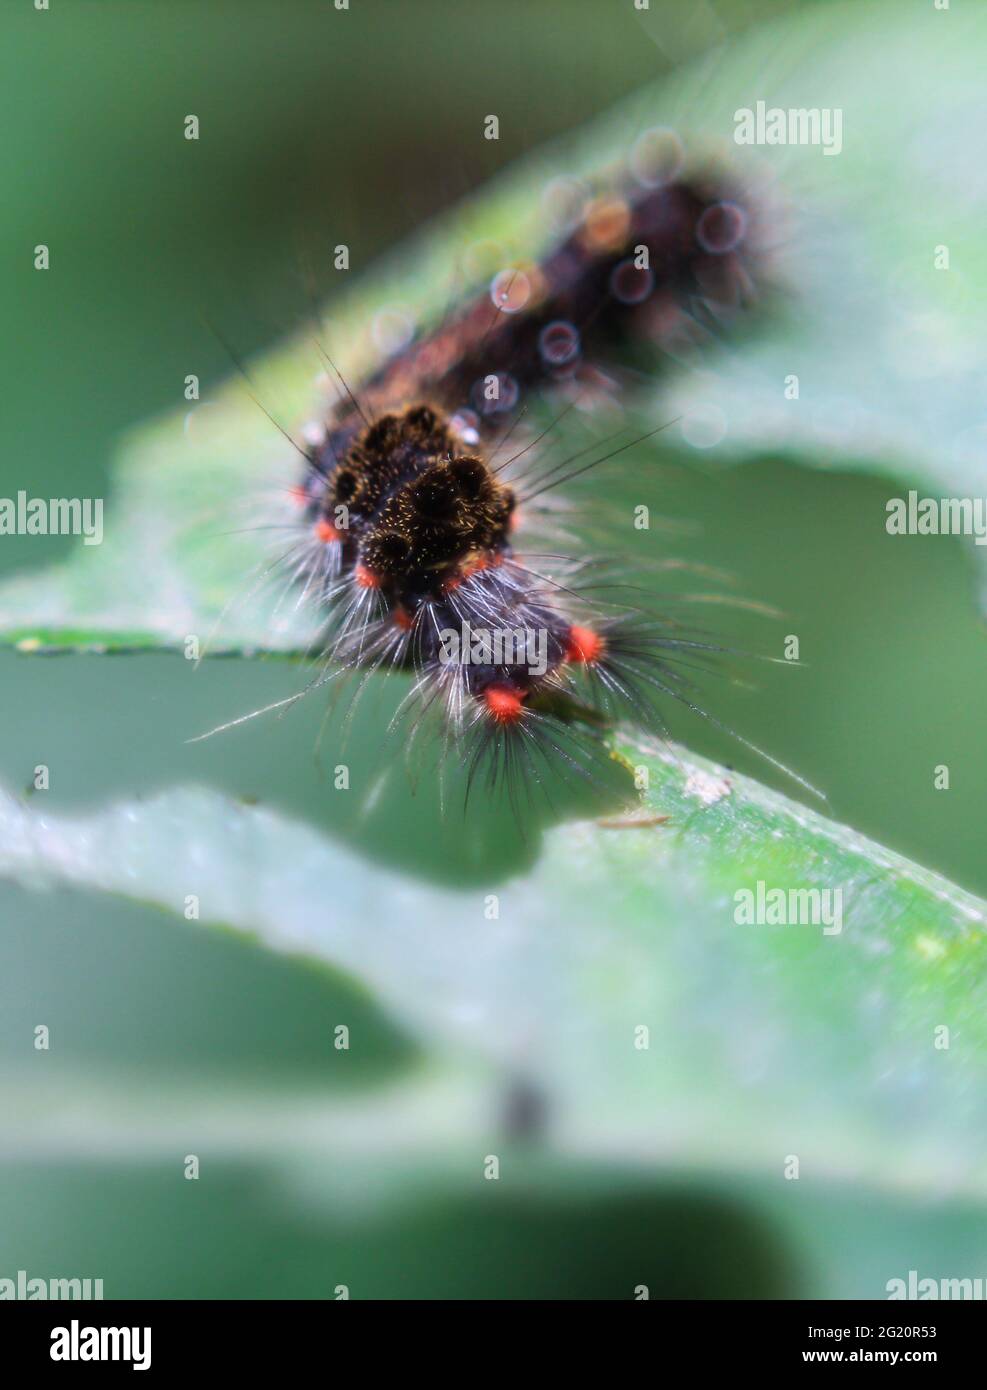 Caterpillar (lepidoptera)are voracious feeders and very damaging to crops. Hairy Caterpillar. Stinging caterpillar destroy vegetable leaf. Stock Photo